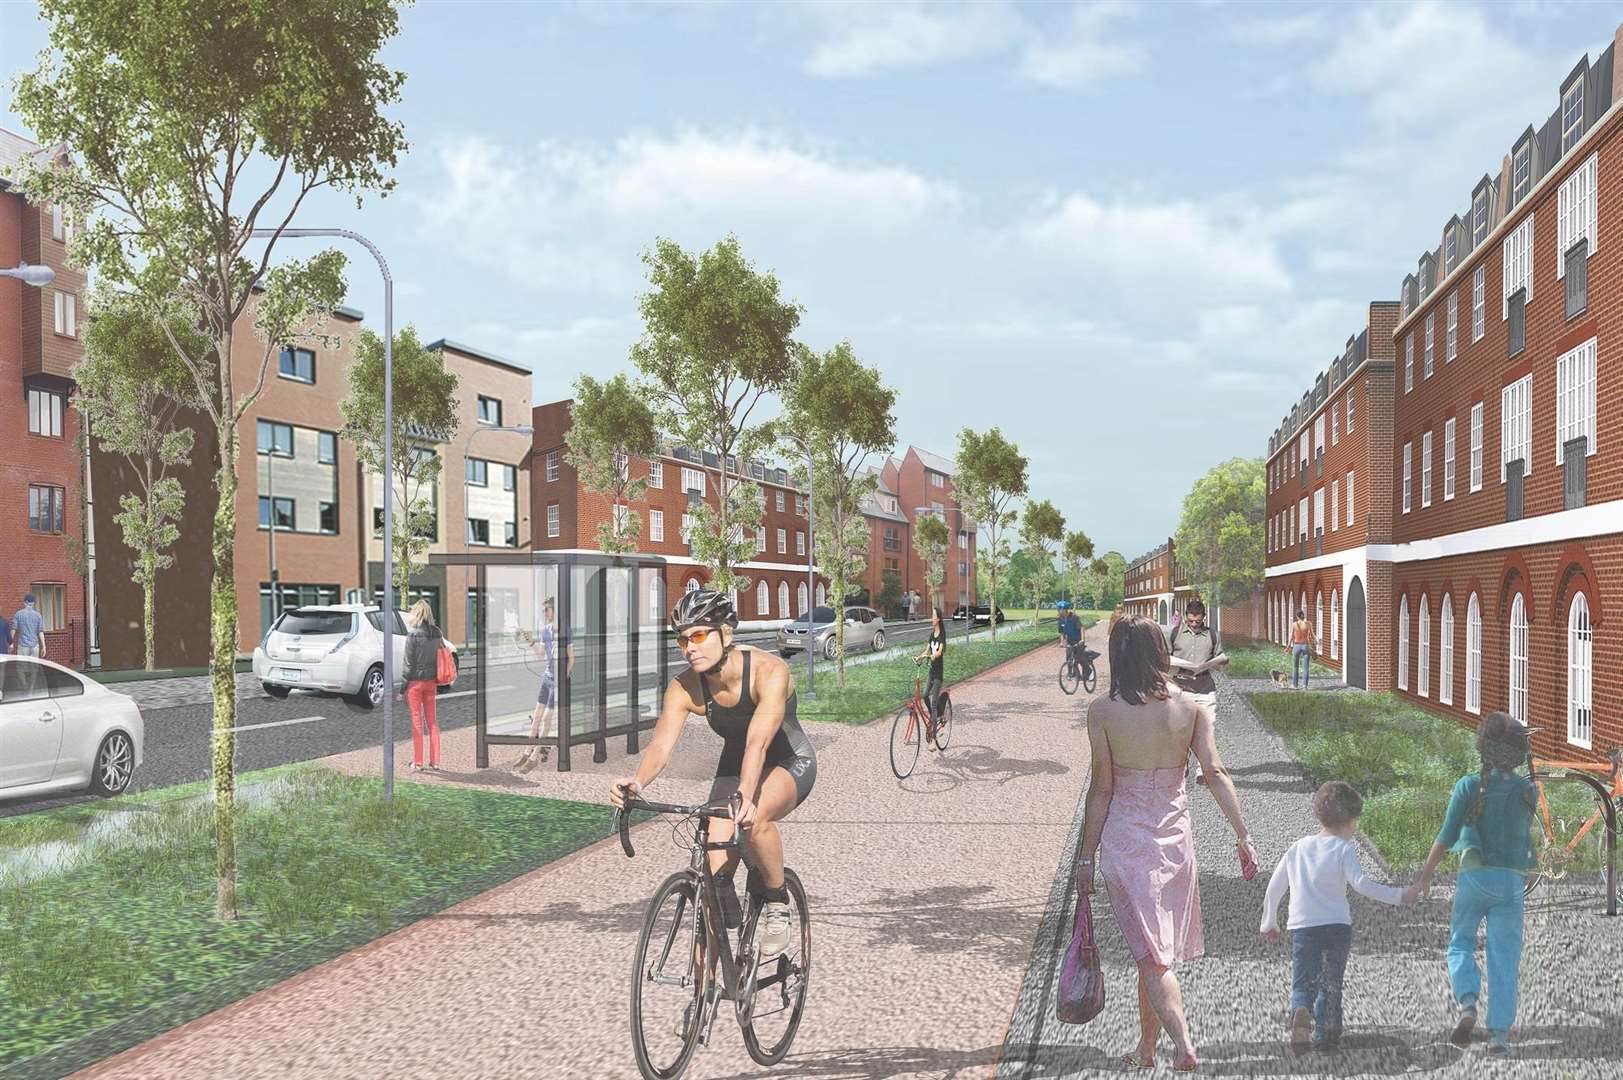 An artist's impression of how the finished Otterpool Park will look at ground level